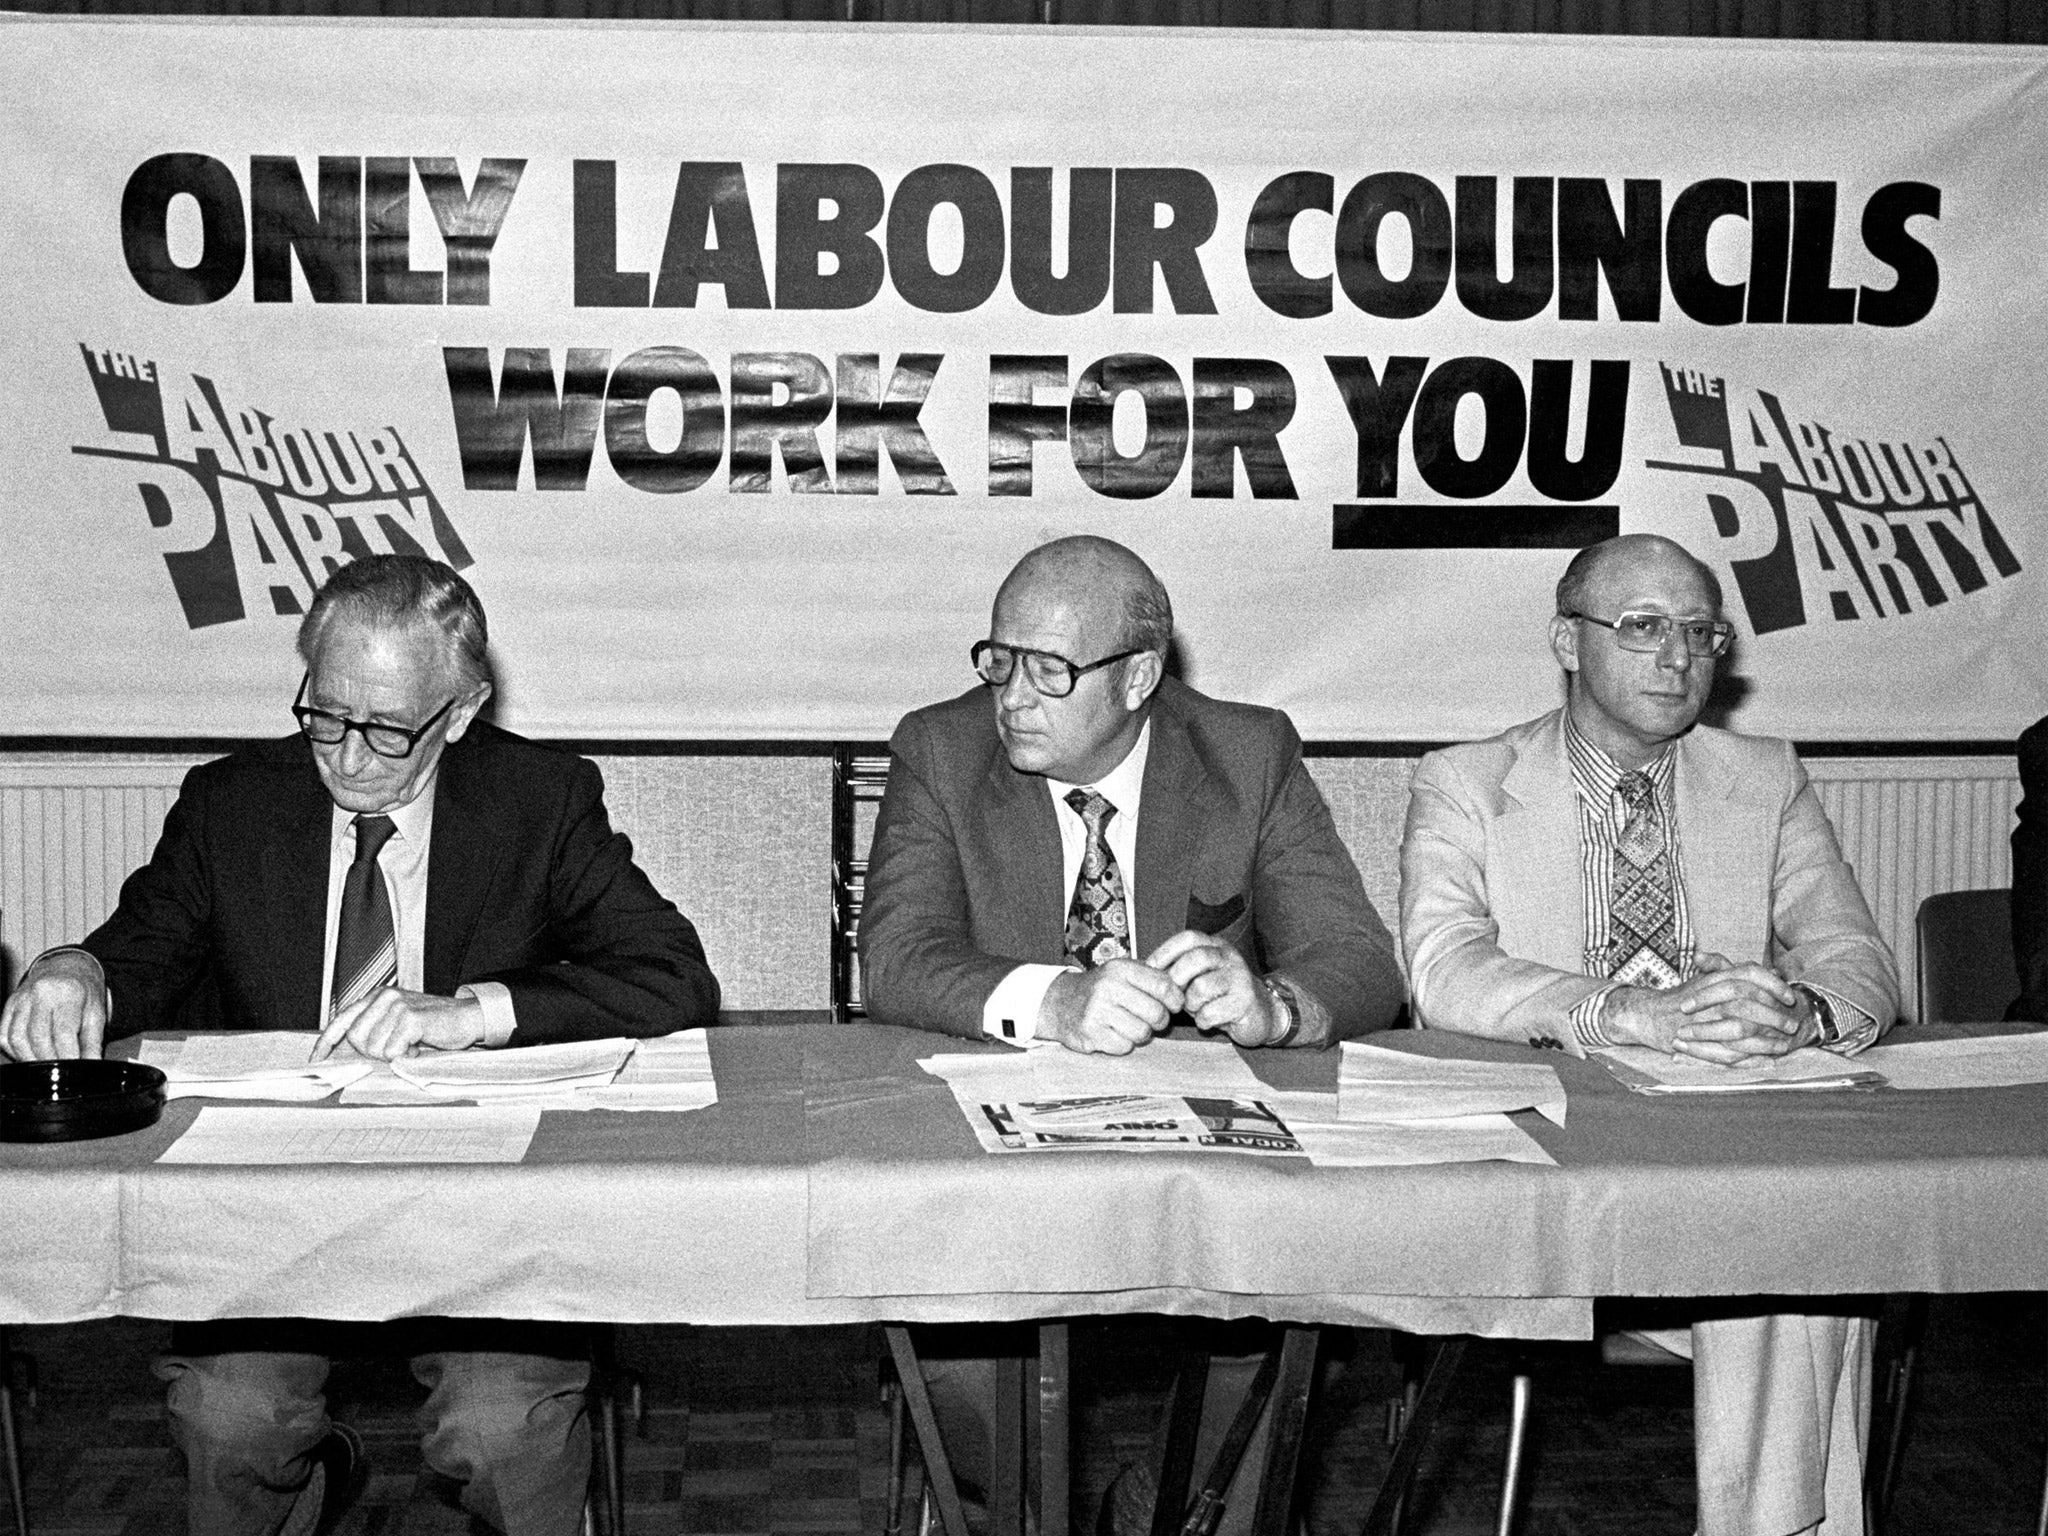 Mortimer, centre, at a press conference in 1982 with Frank Allaun, left, and Gerald Kaufman